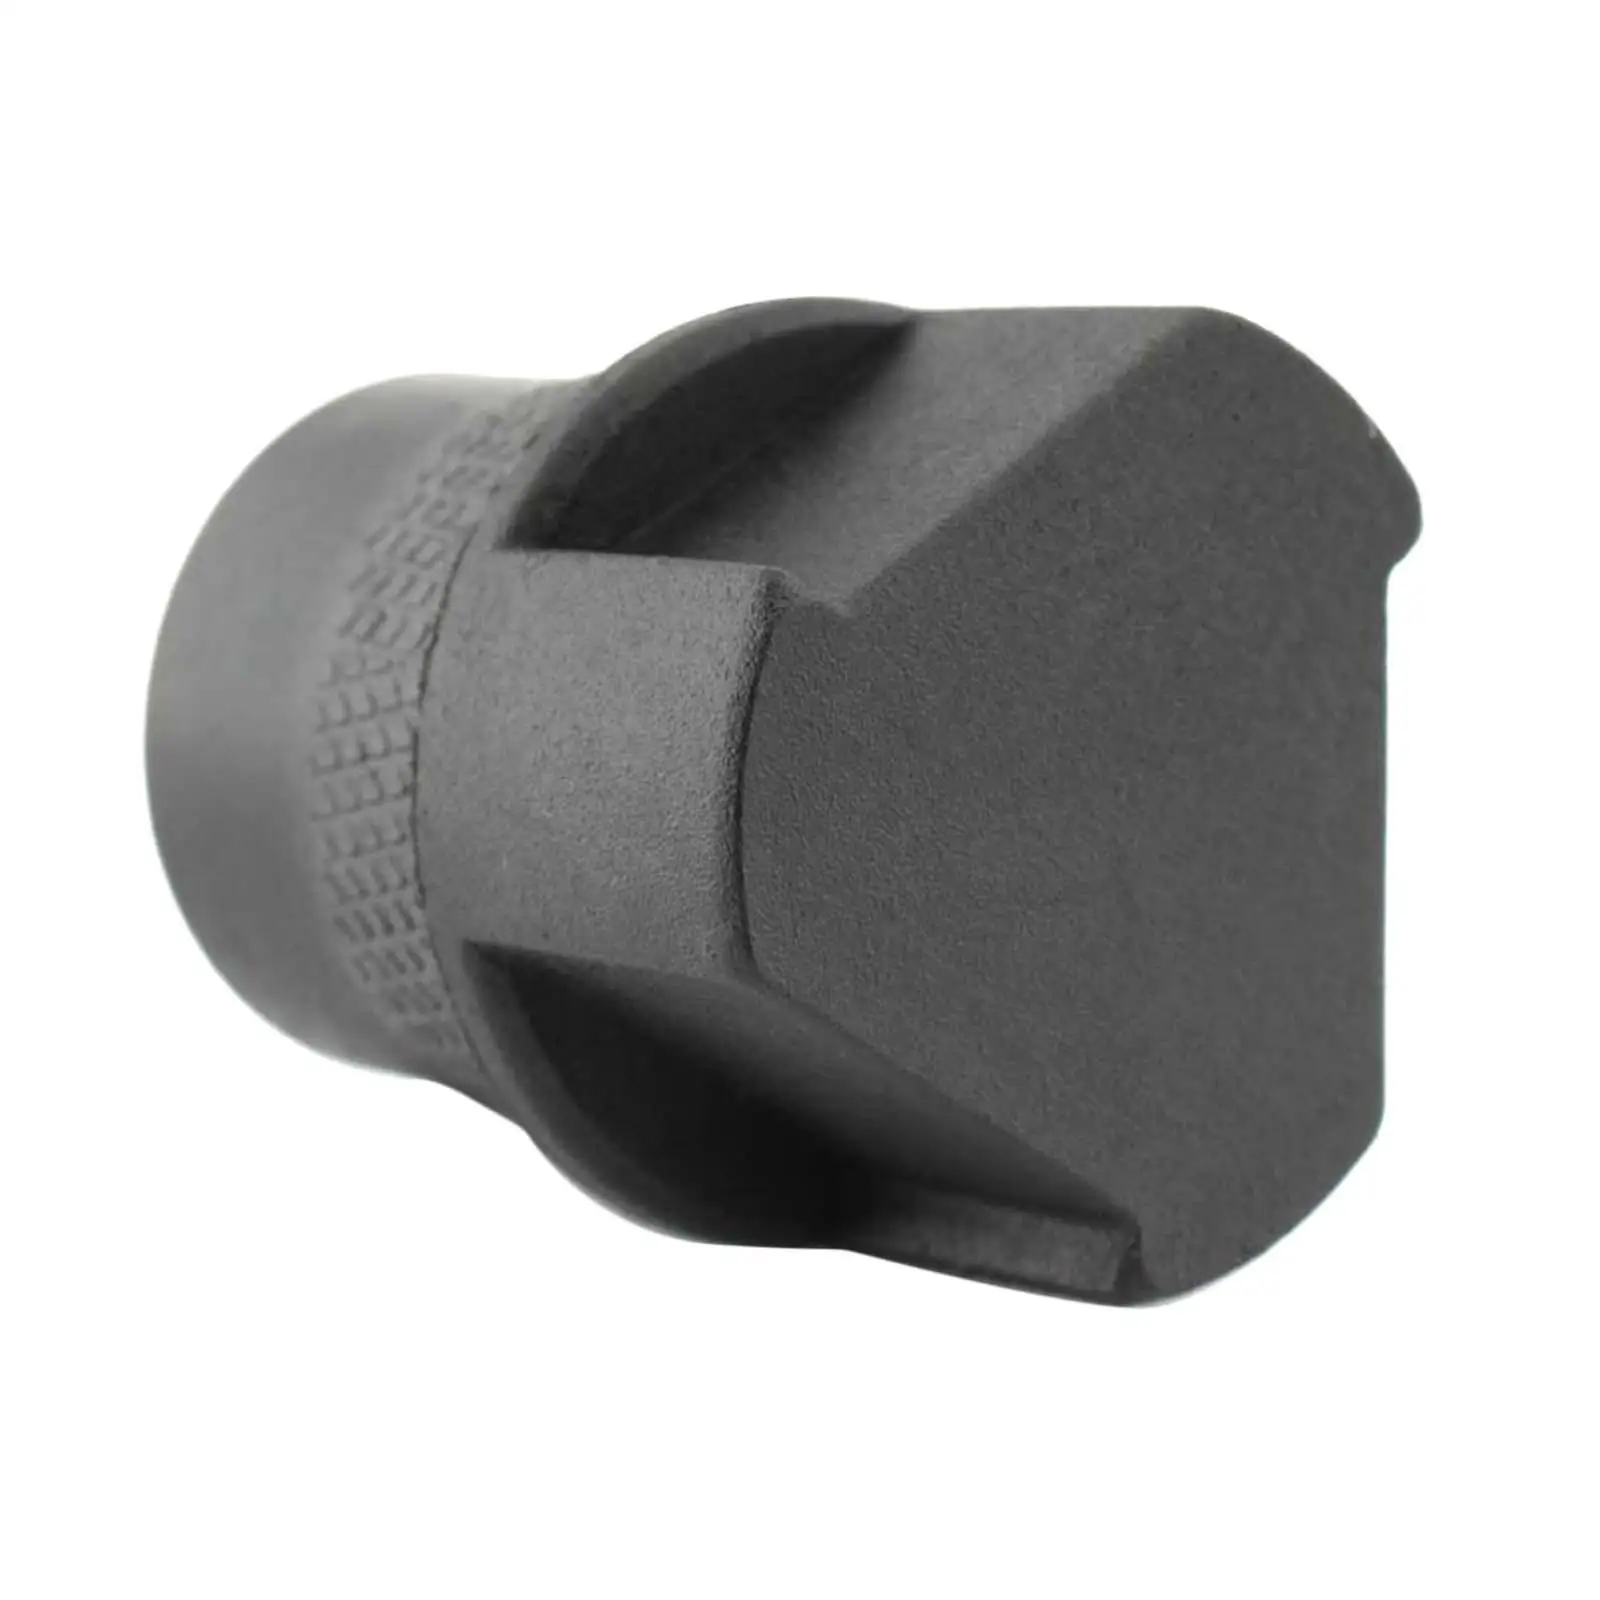 Oil Filter Wrench Cap Removal Tool for BMW /Adventure R1200RT